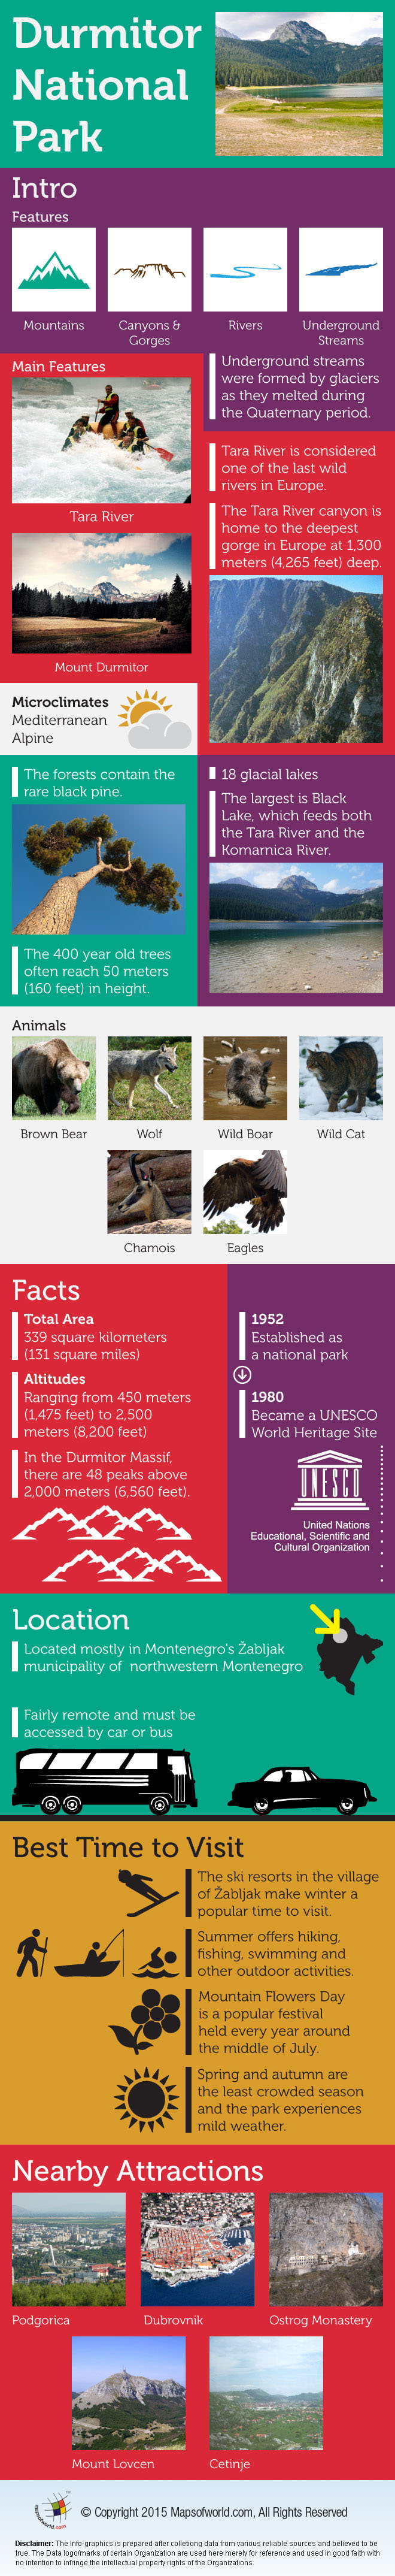 Durmitor National Park Infographic